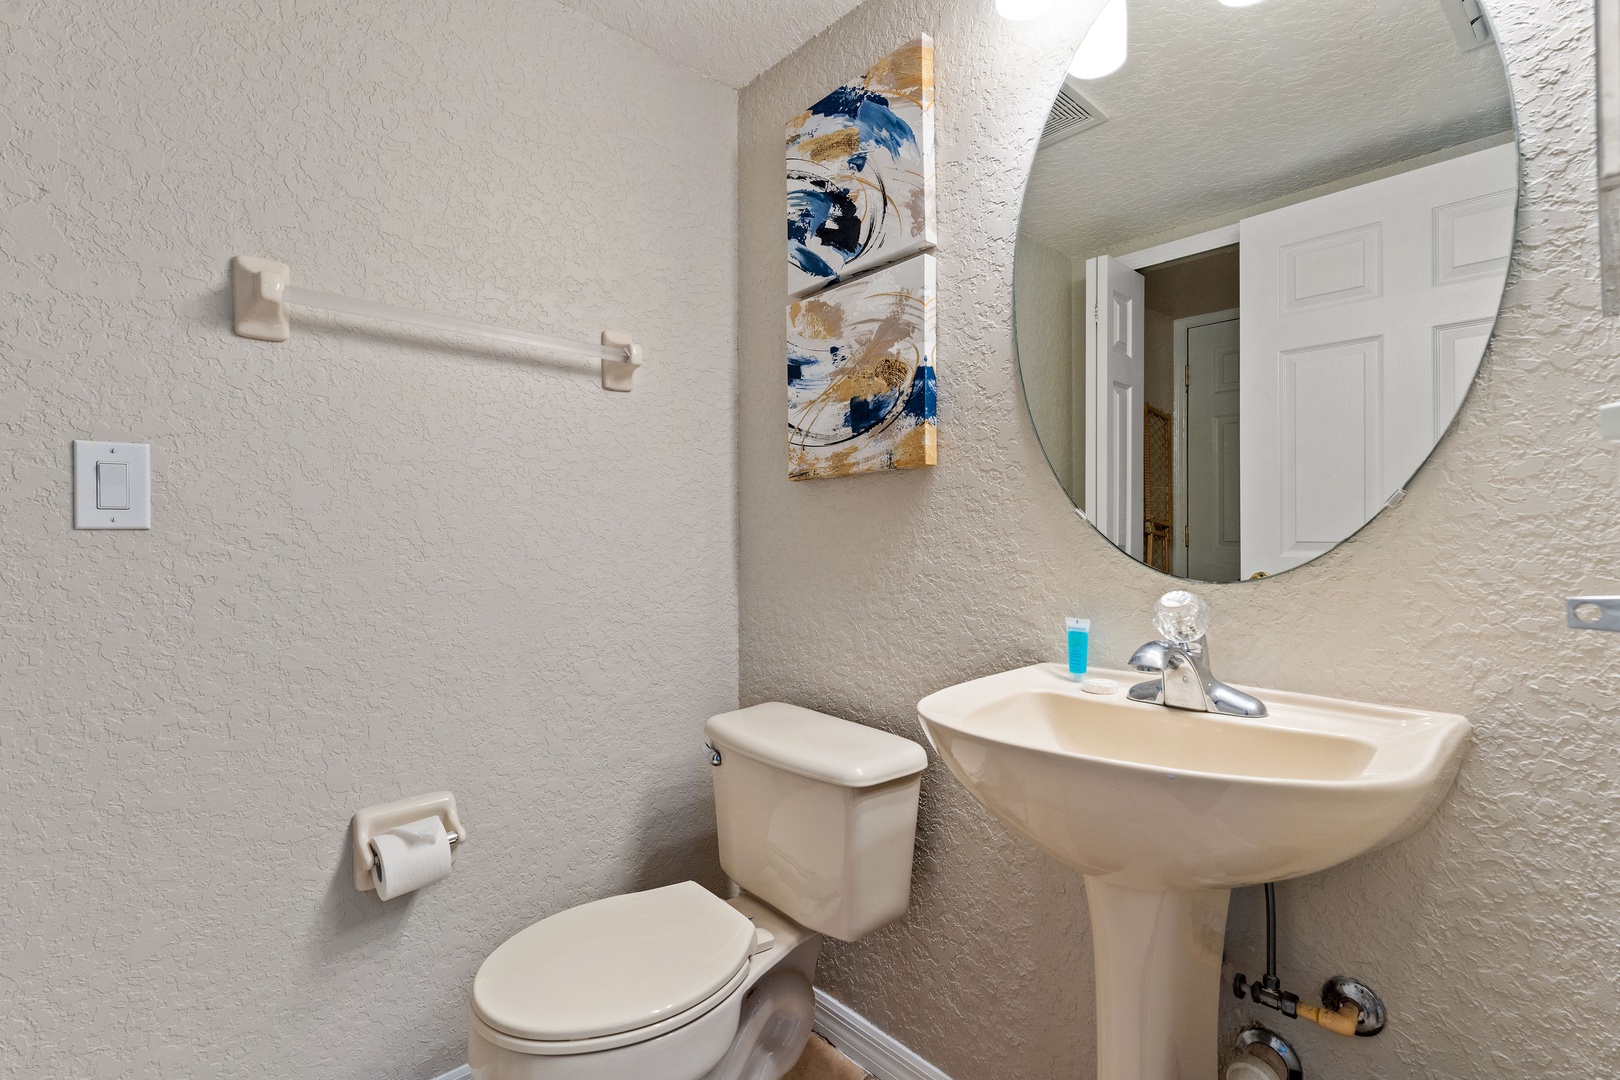 A half bathroom is conveniently tucked away on the main level, just off the entryway